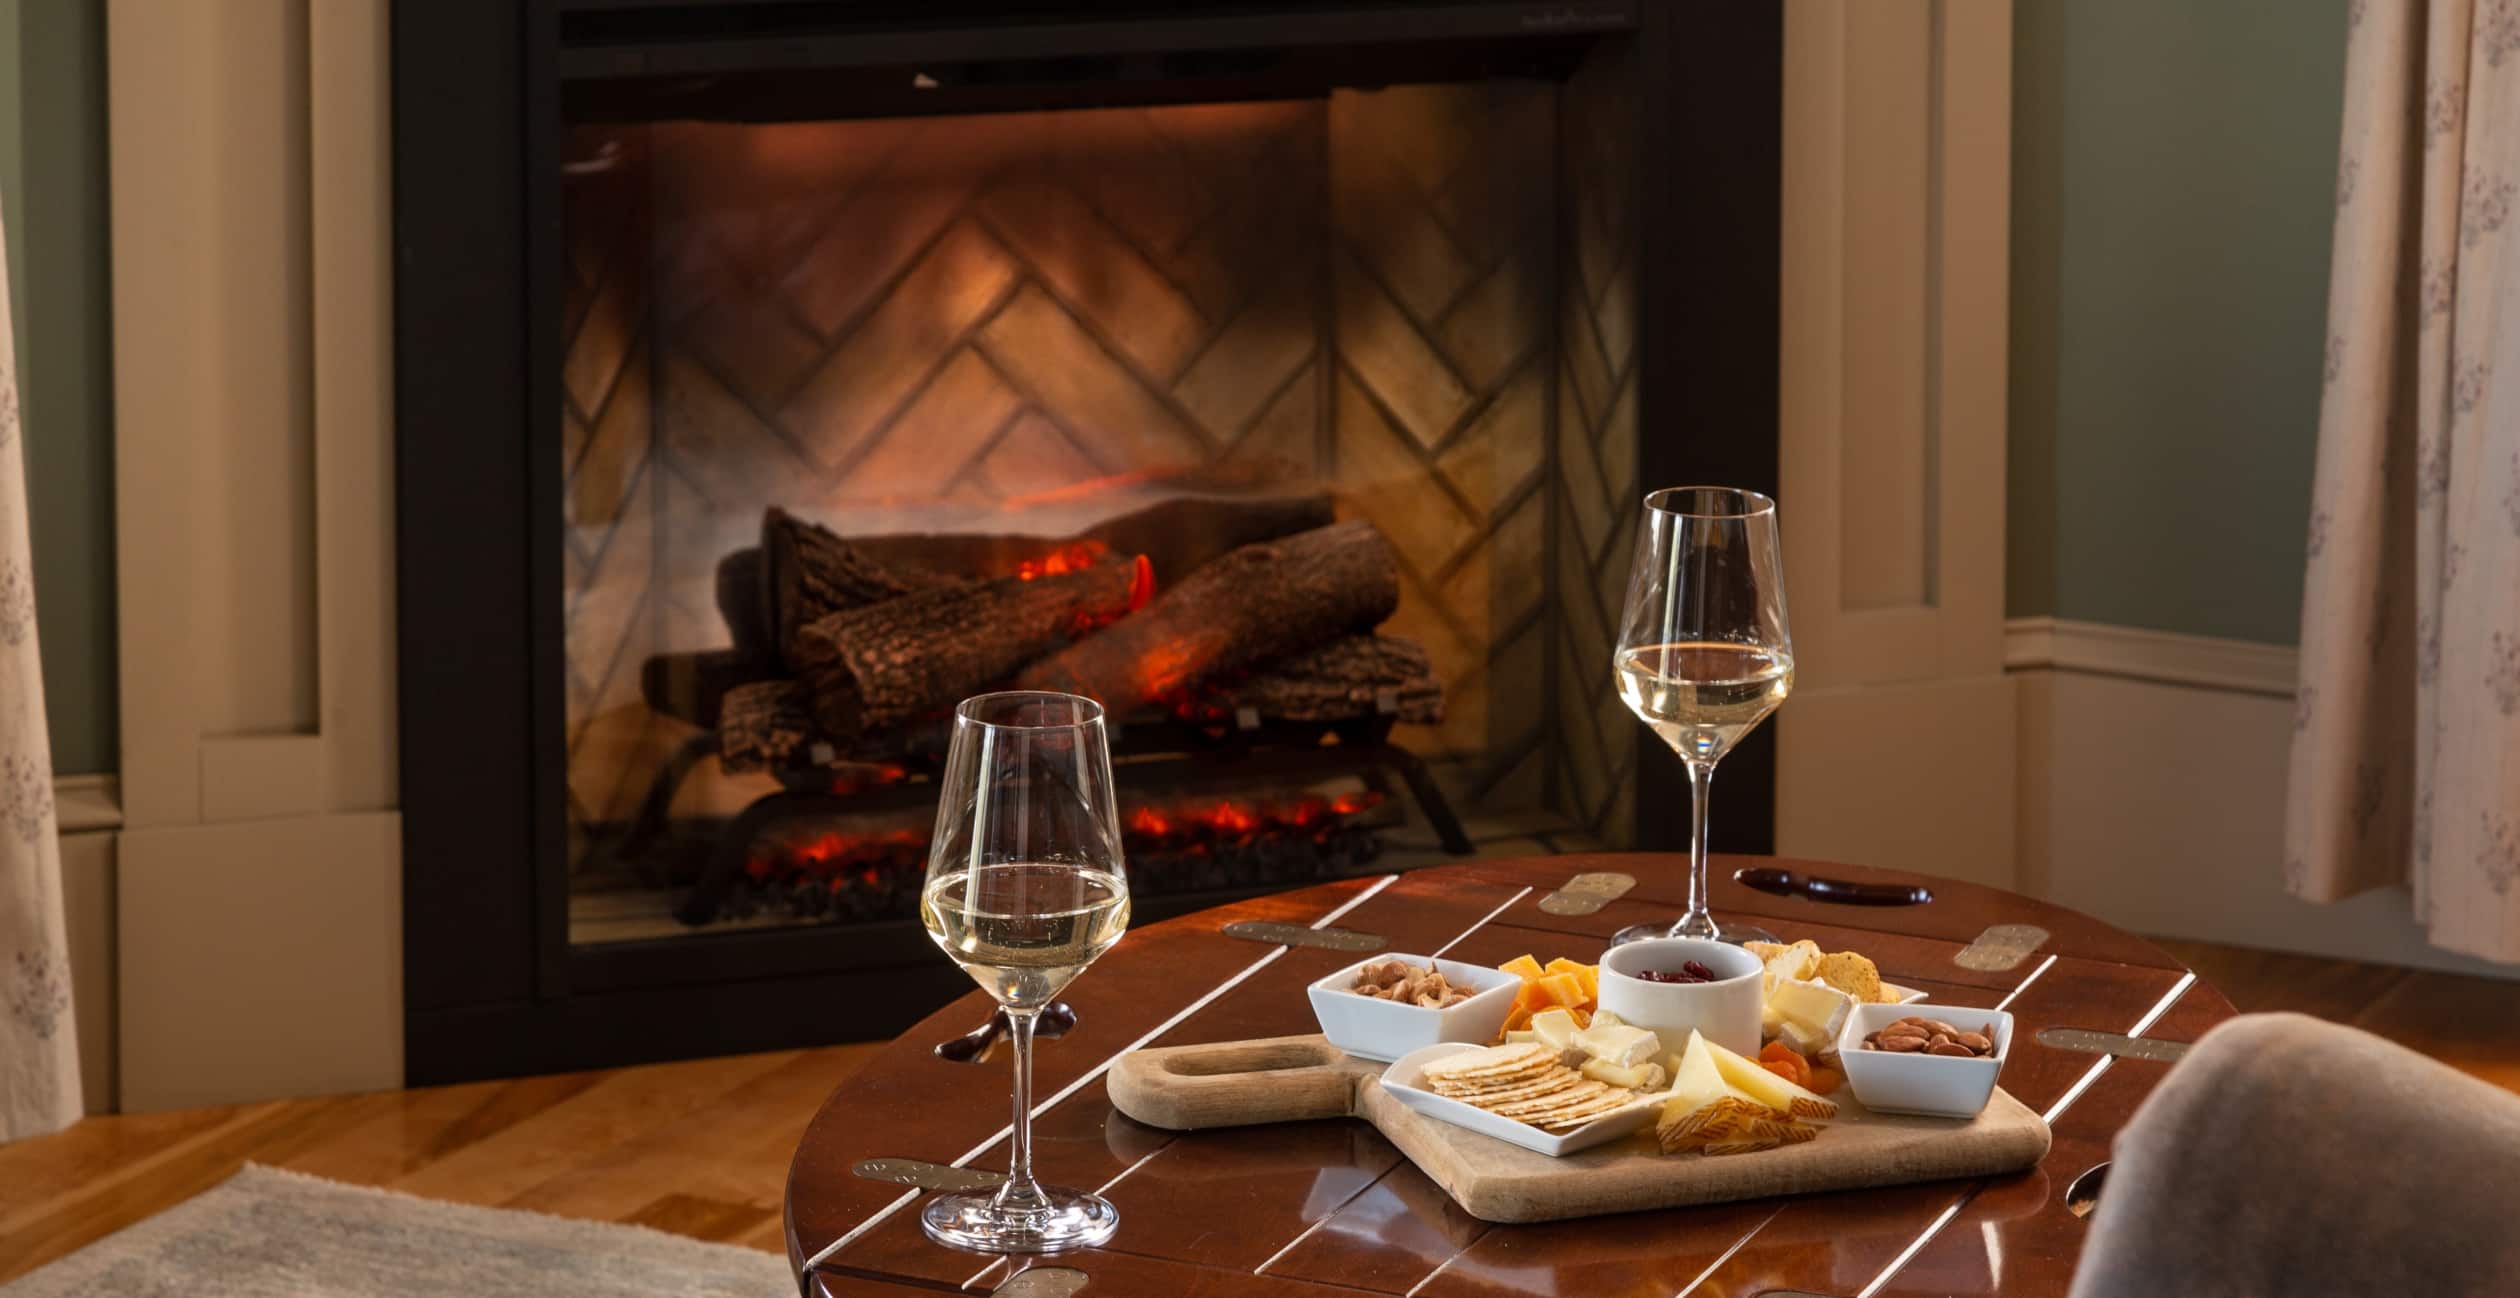 Romantic nights in with a cheese board and glasses of wine in front of the fireplace